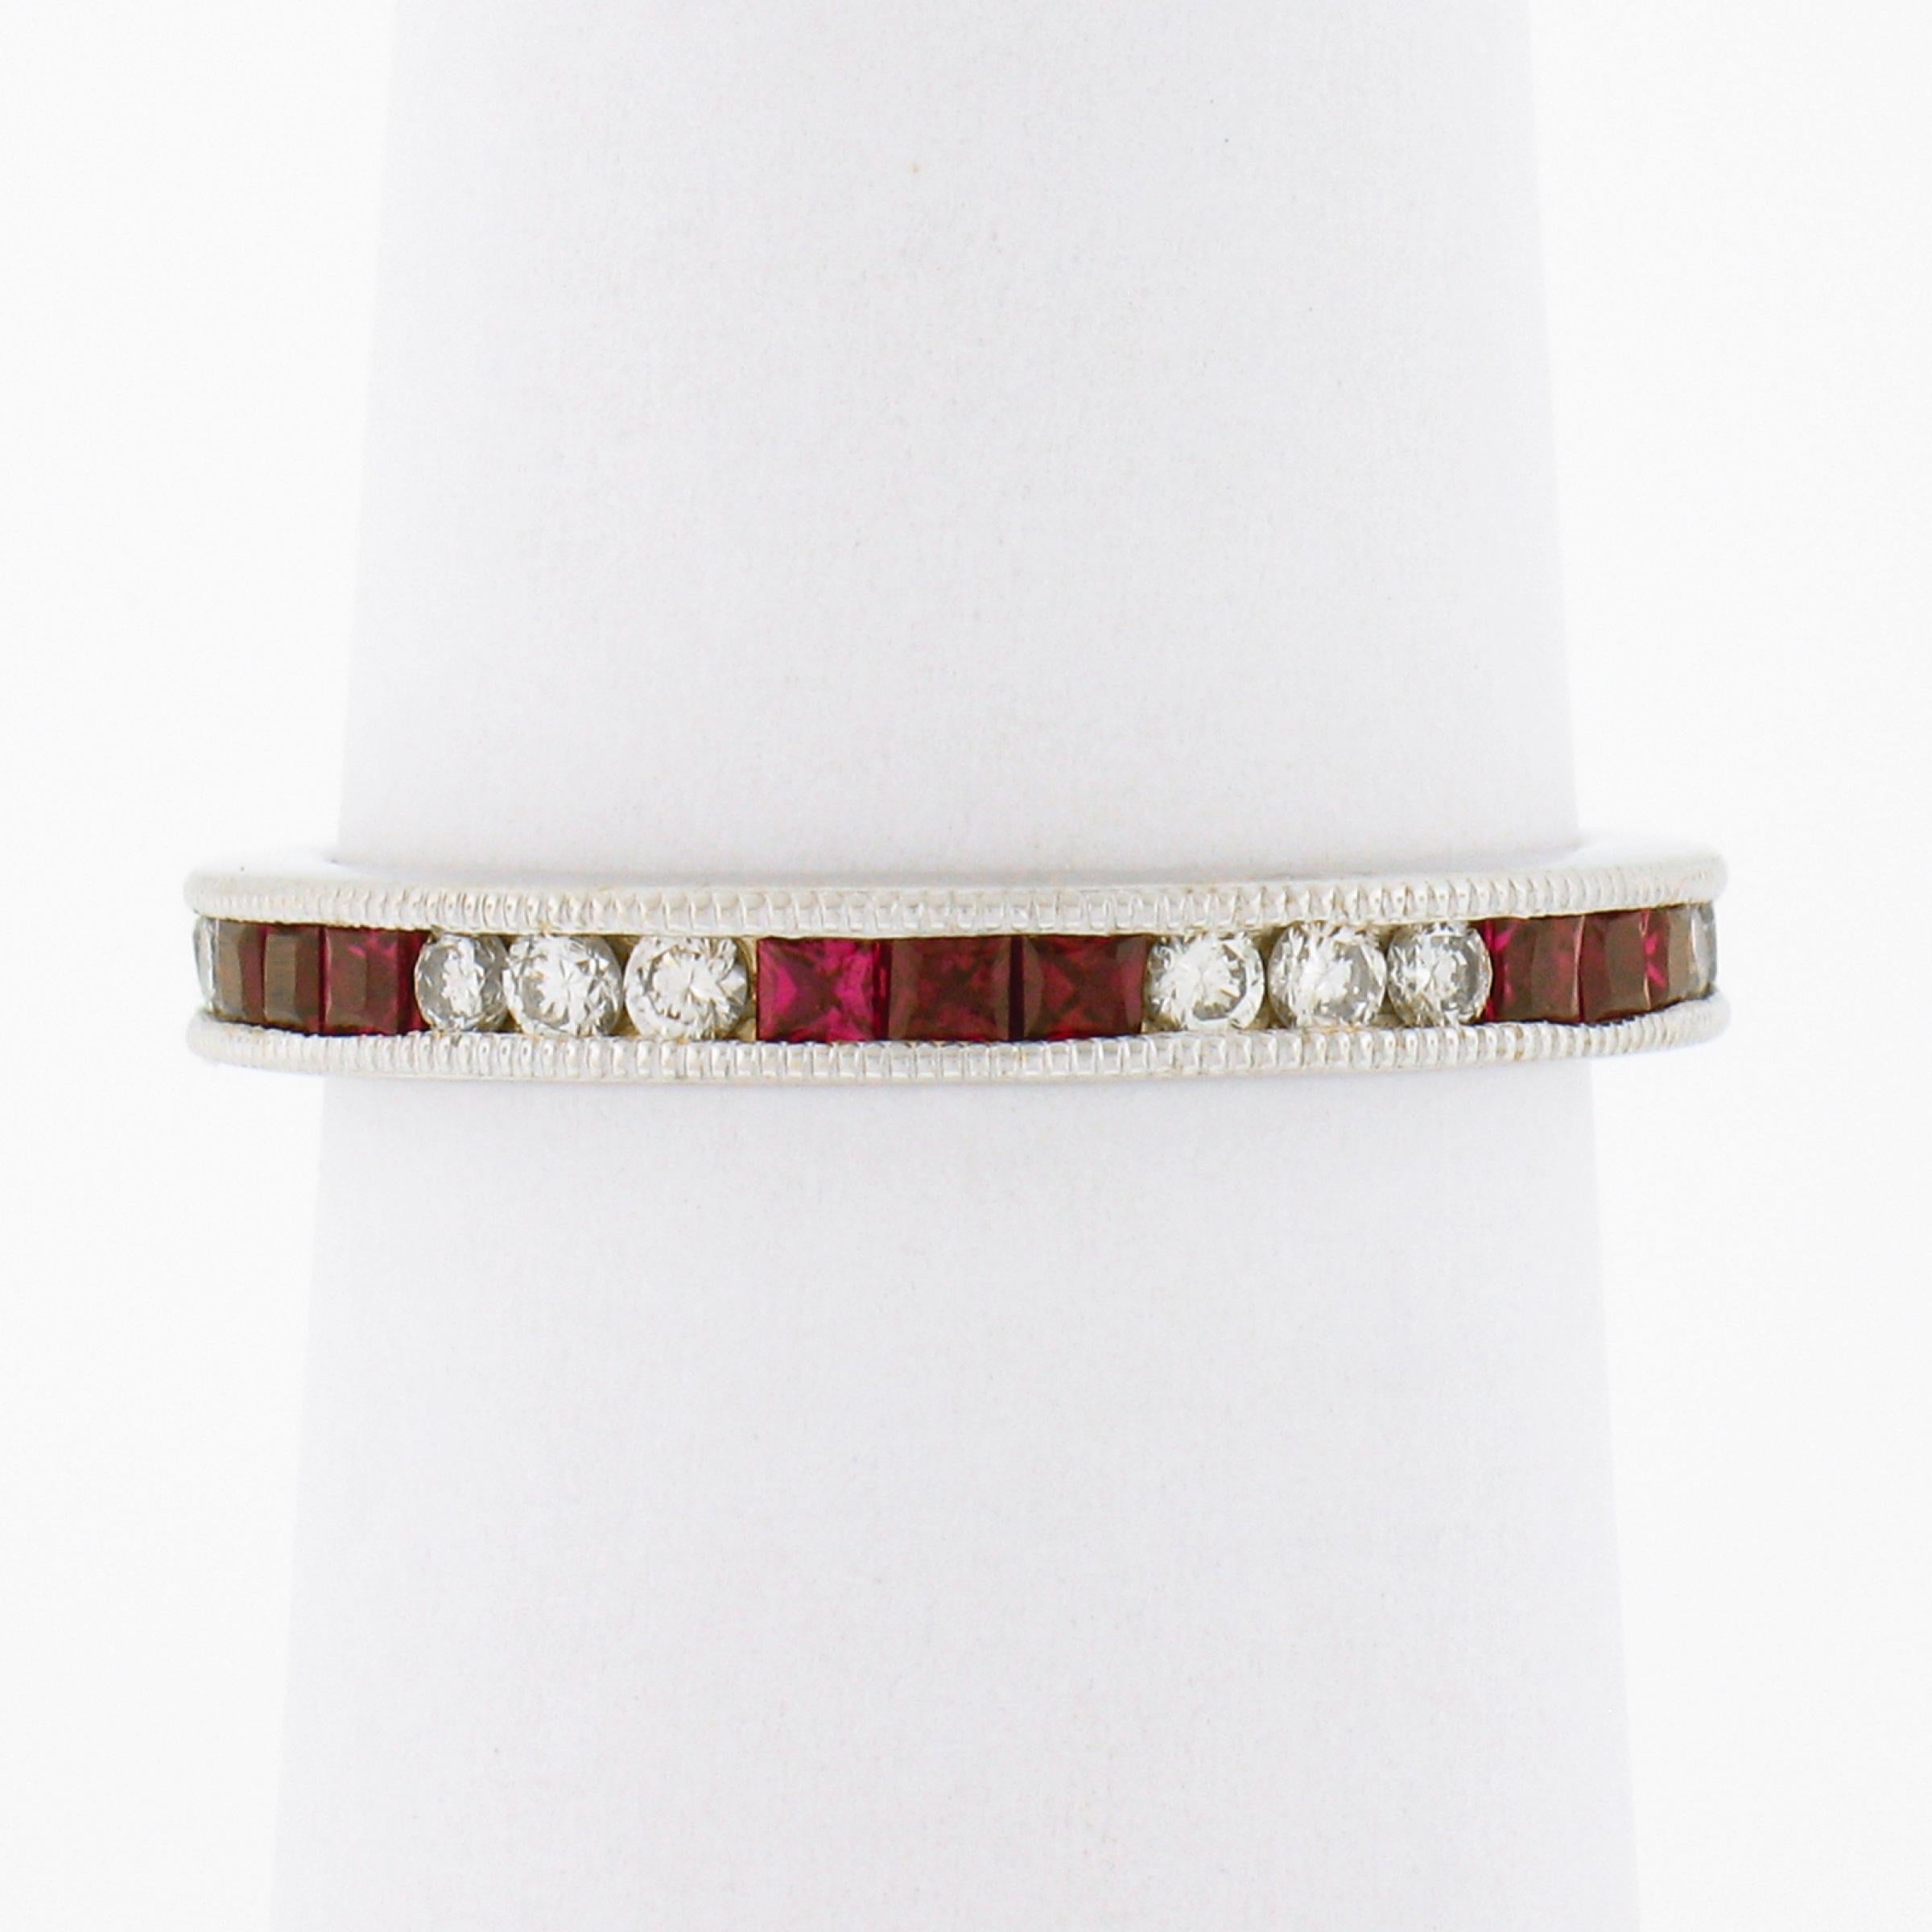 This marvelous ruby and diamond eternity band ring is crafted in solid 18k white gold and features a well made channel setting which is delicately milgrain etched throughout both sides, and securely holds the stunning stones entirely around the